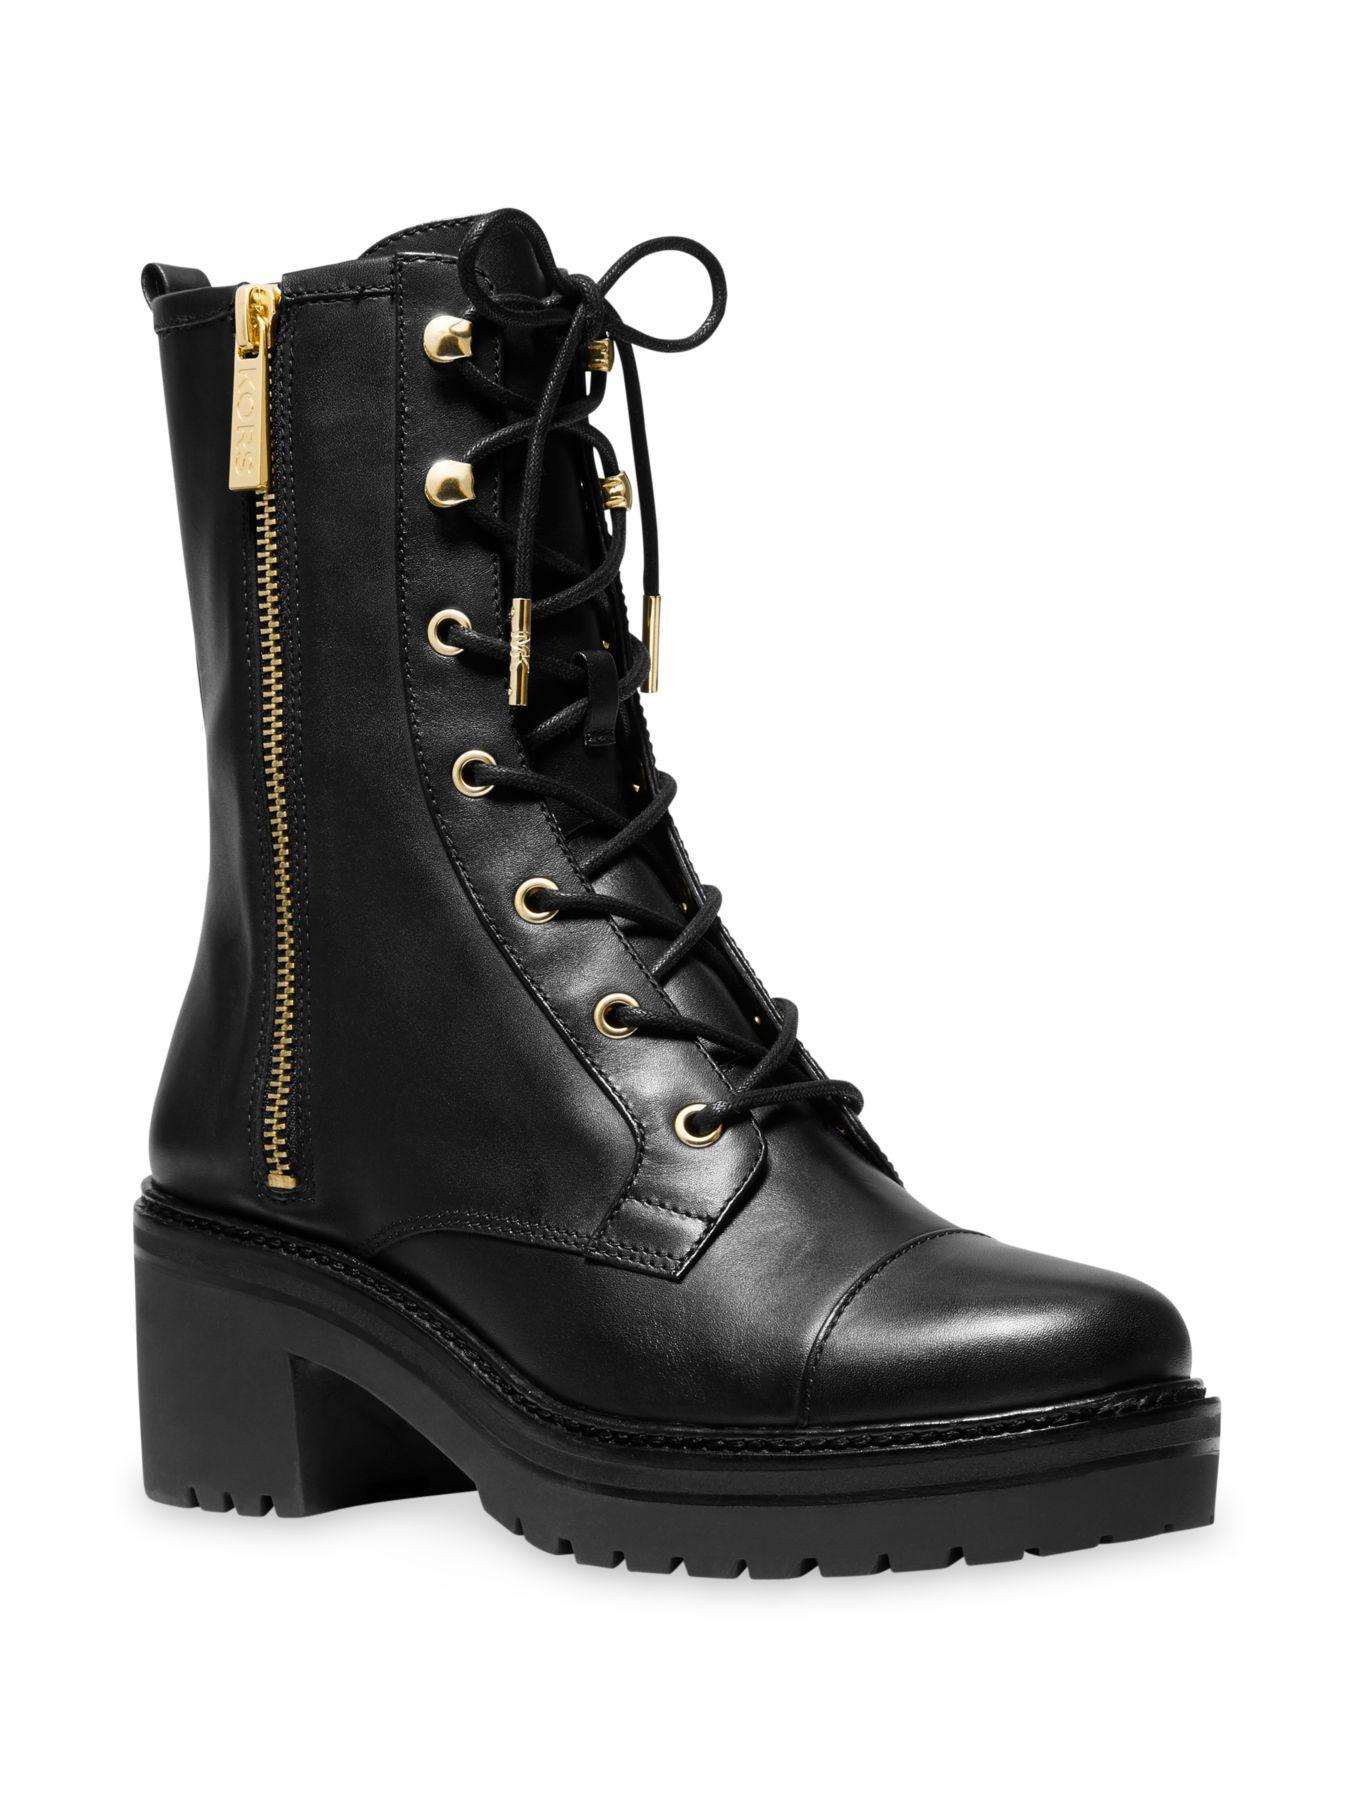 Michael Kors Anaka Leather Combat Boot in Black - Lyst